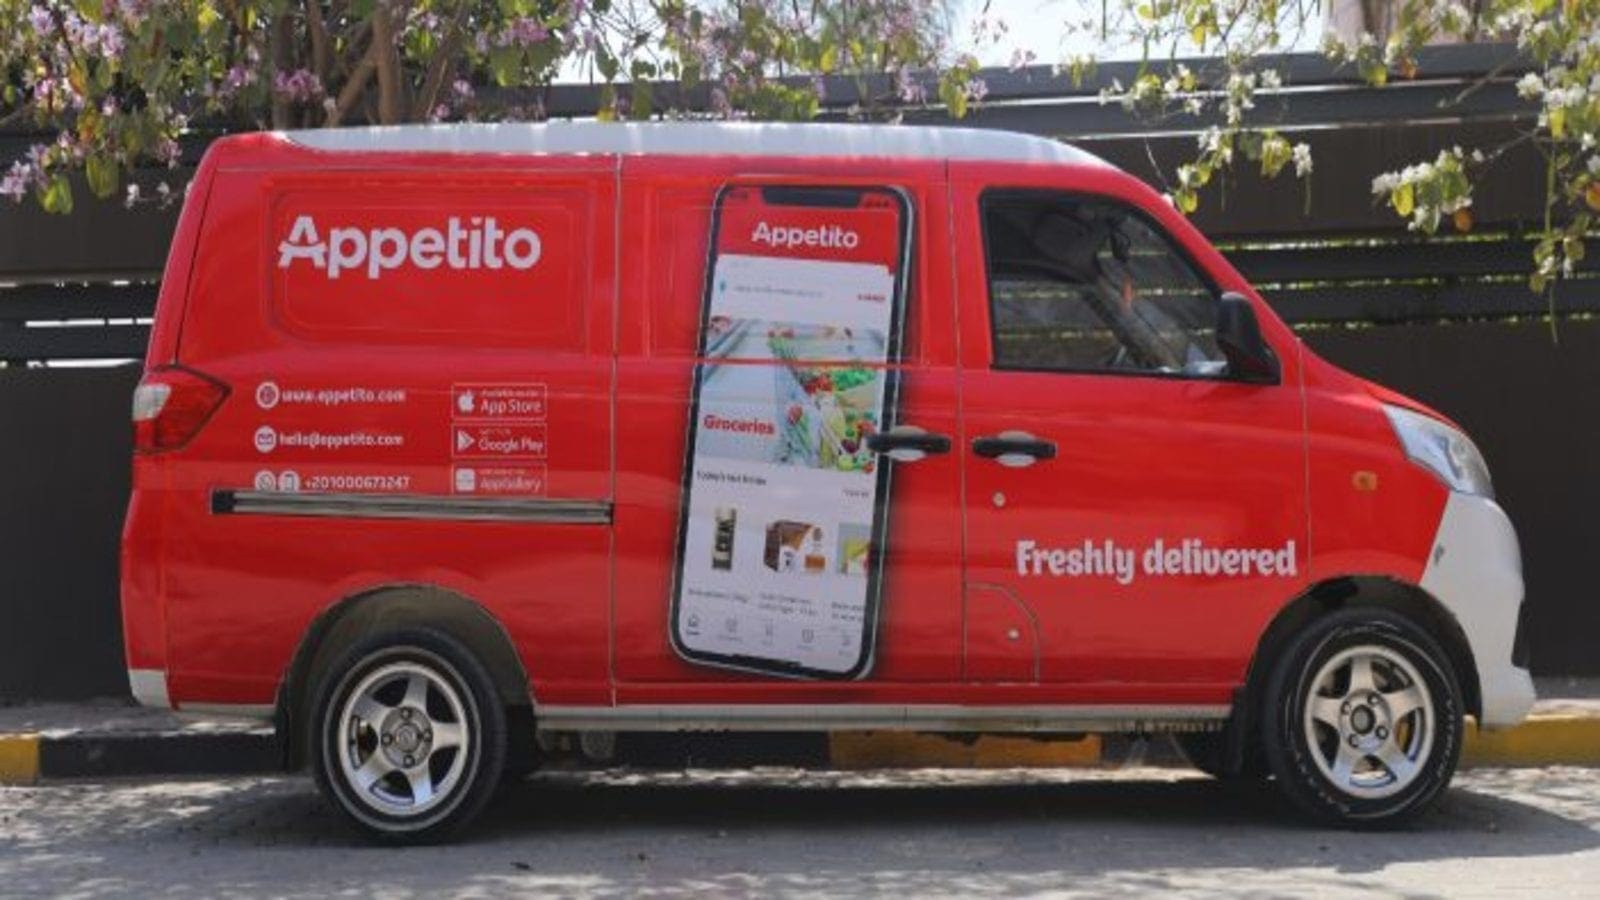 Egyptian grocery delivery platforms Breadfast, Appetito raise funds to fuel expansion